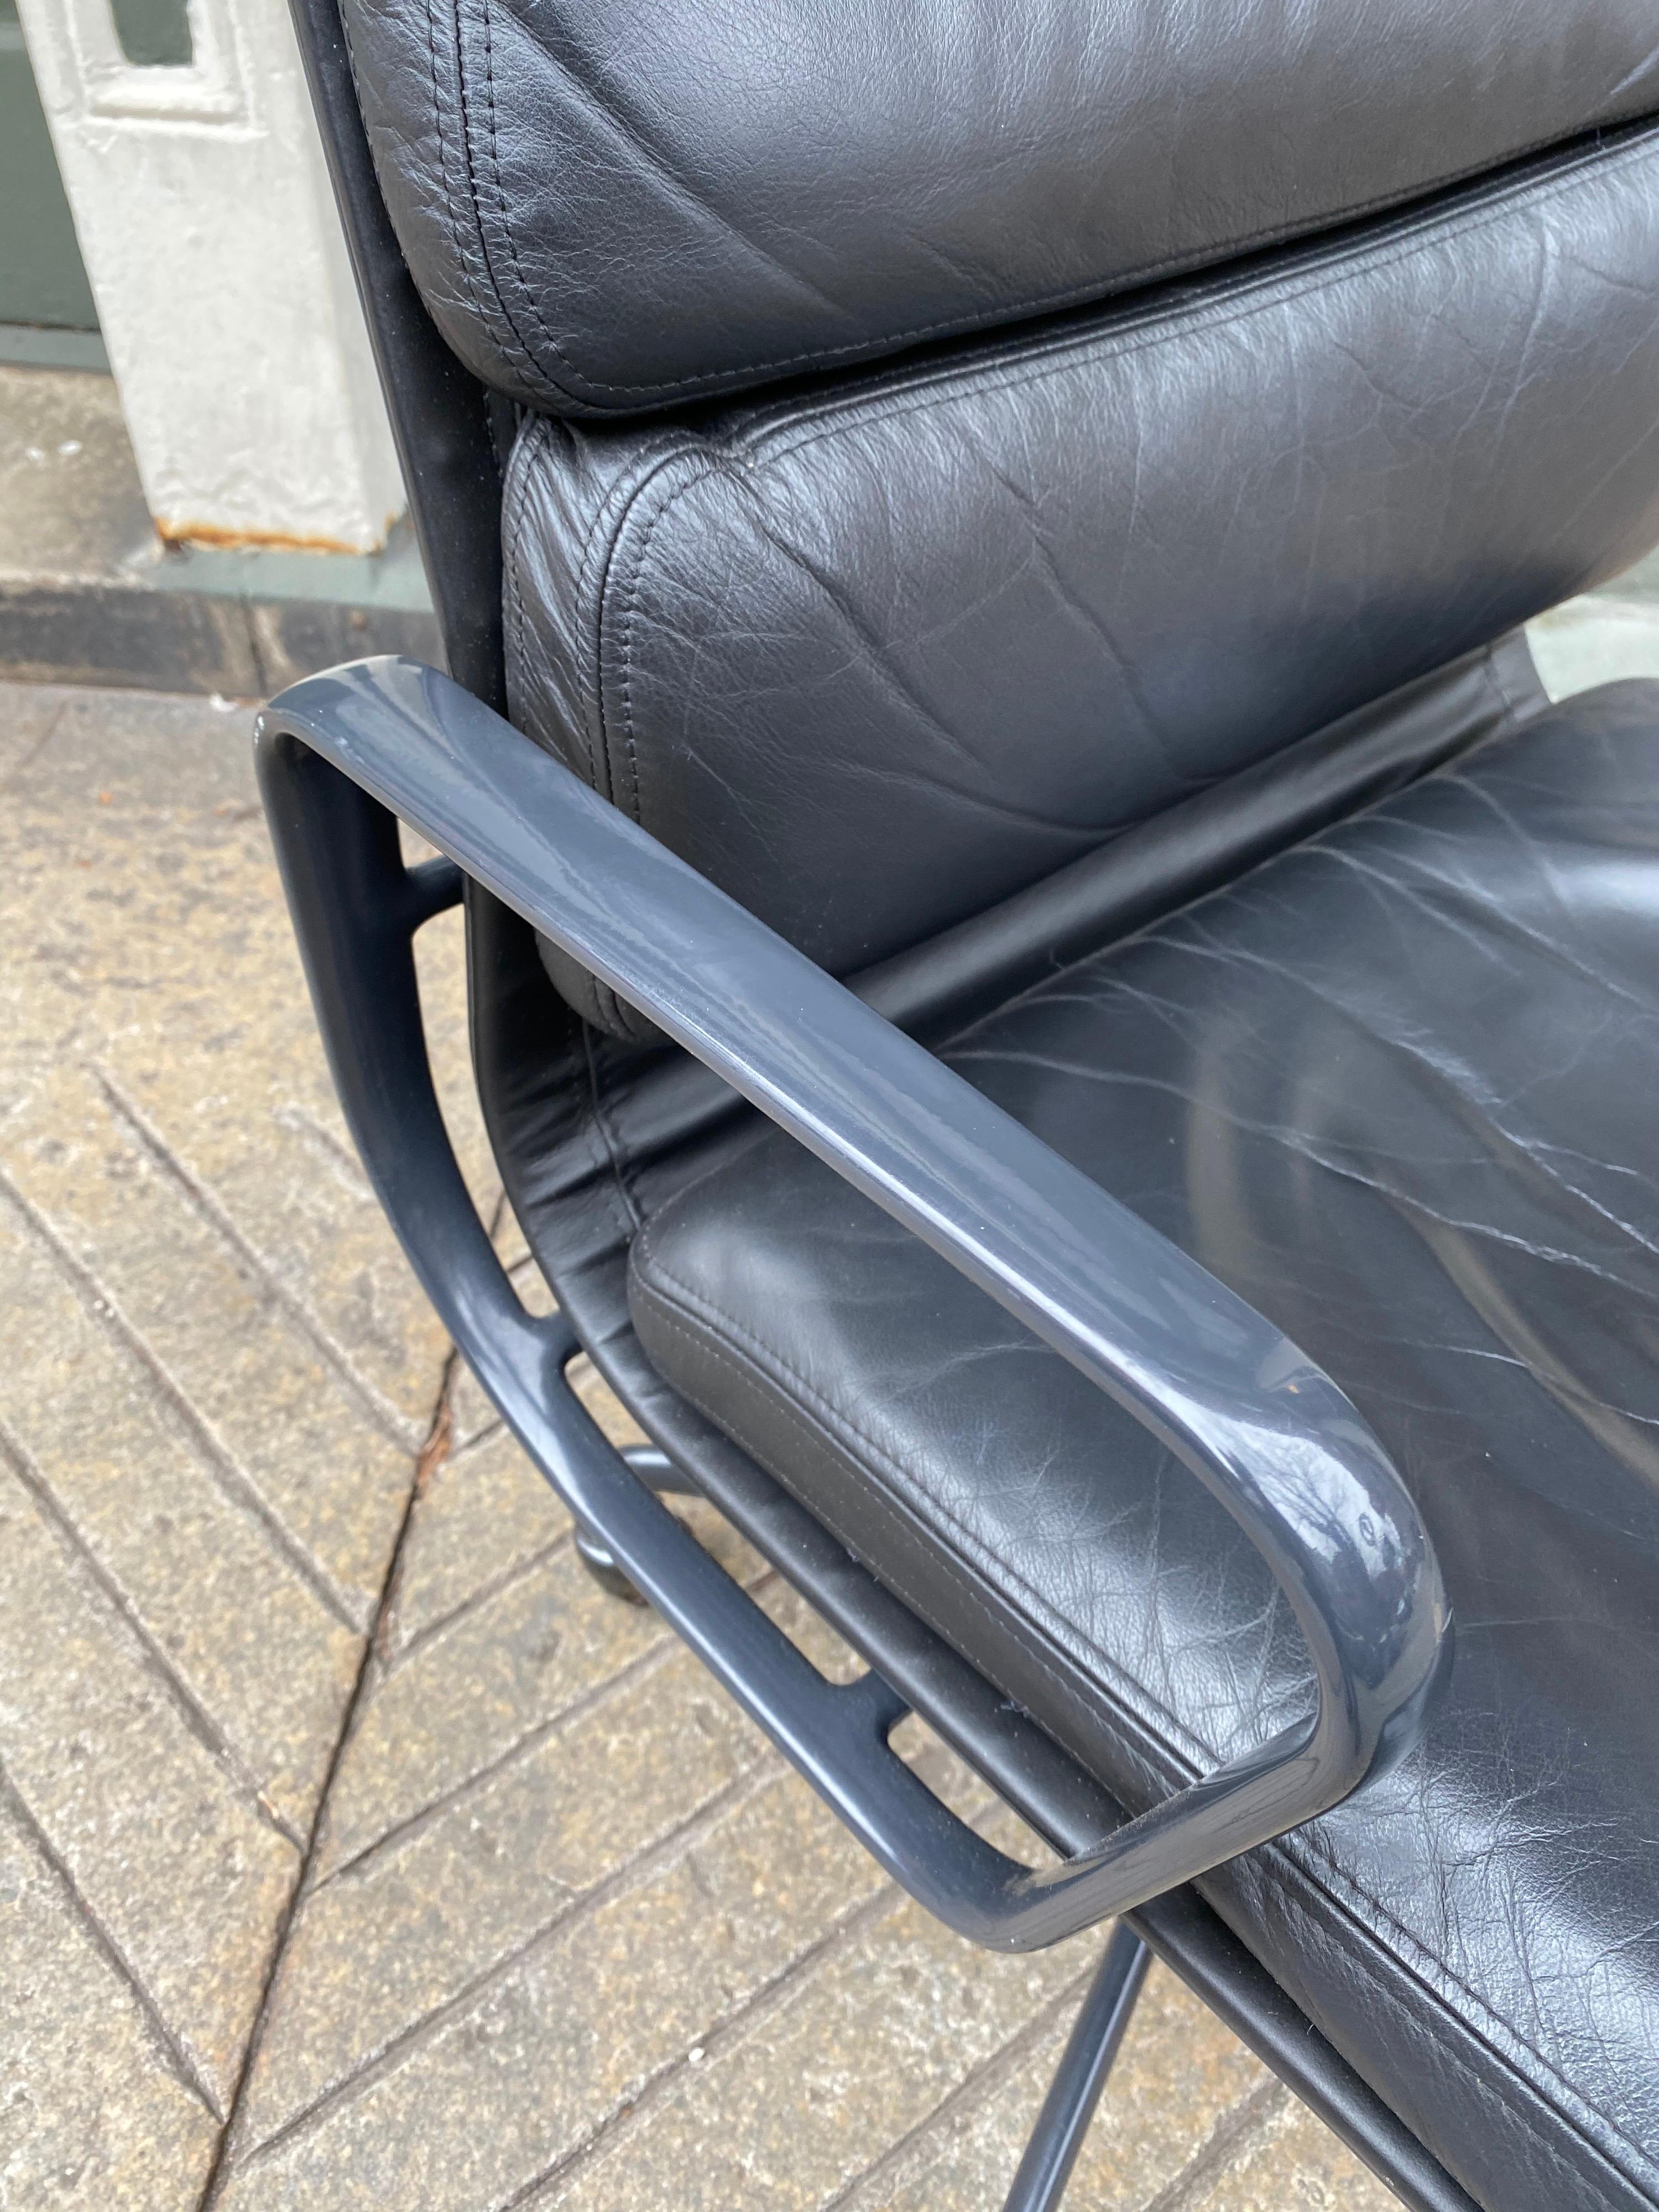 Eames for Herman Miller executive soft pad black leather desk chair. Overall very good shape with a couple flaws to paint on arms and corners of leather. Sits great! Very comfortable chair that has both style and Classic midcentury looks! Arms and